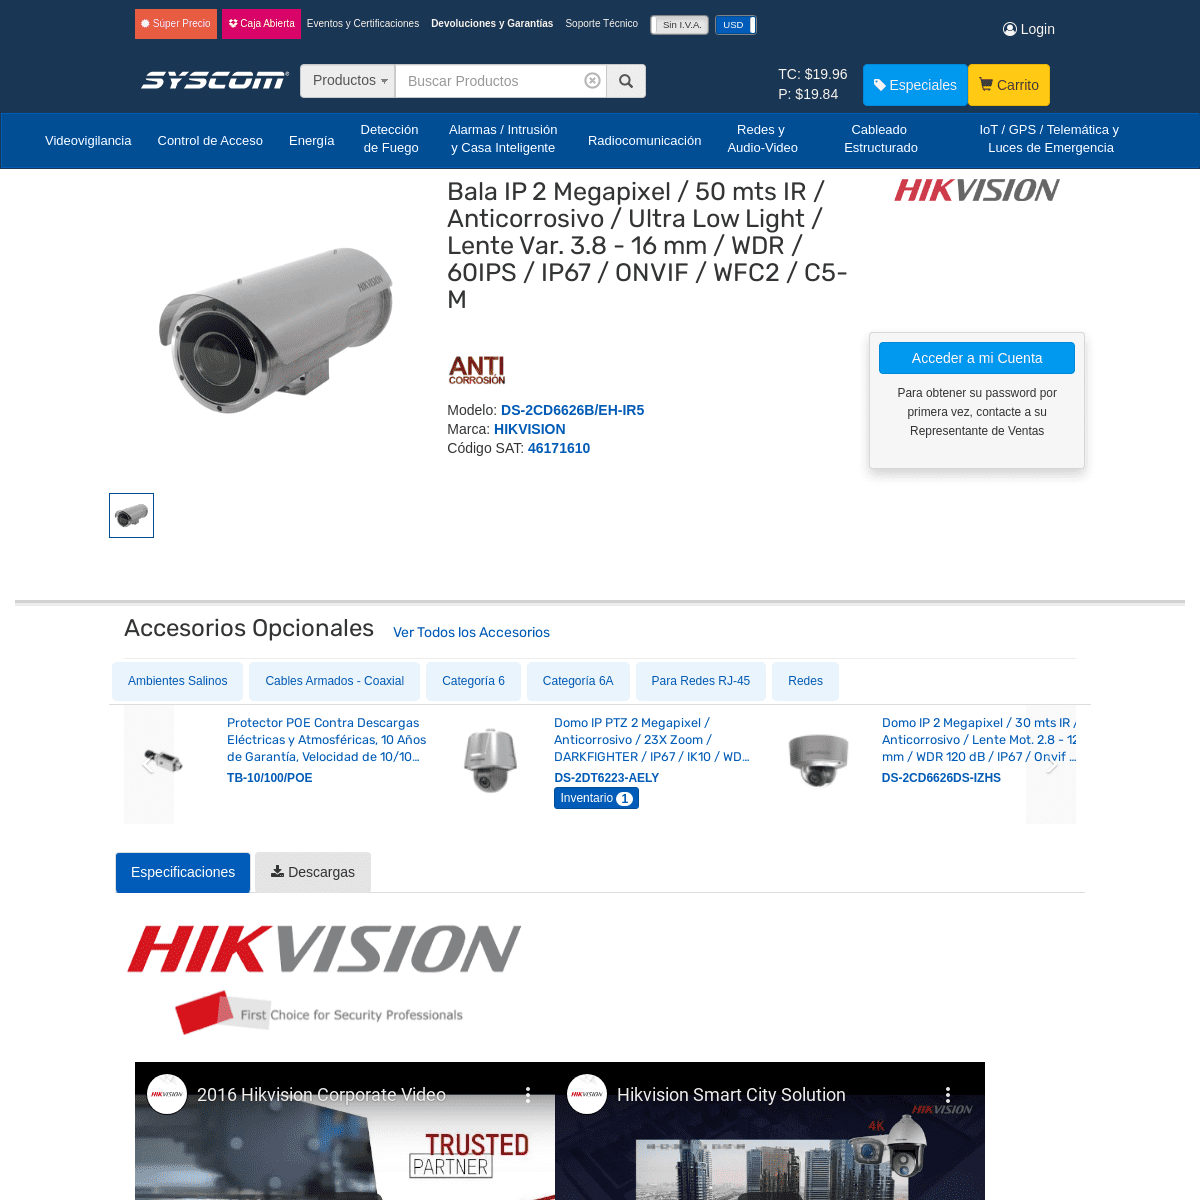 A complete backup of https://www.syscom.mx/producto/DS-2CD6626B/EH-IR5-HIKVISION-88231.html